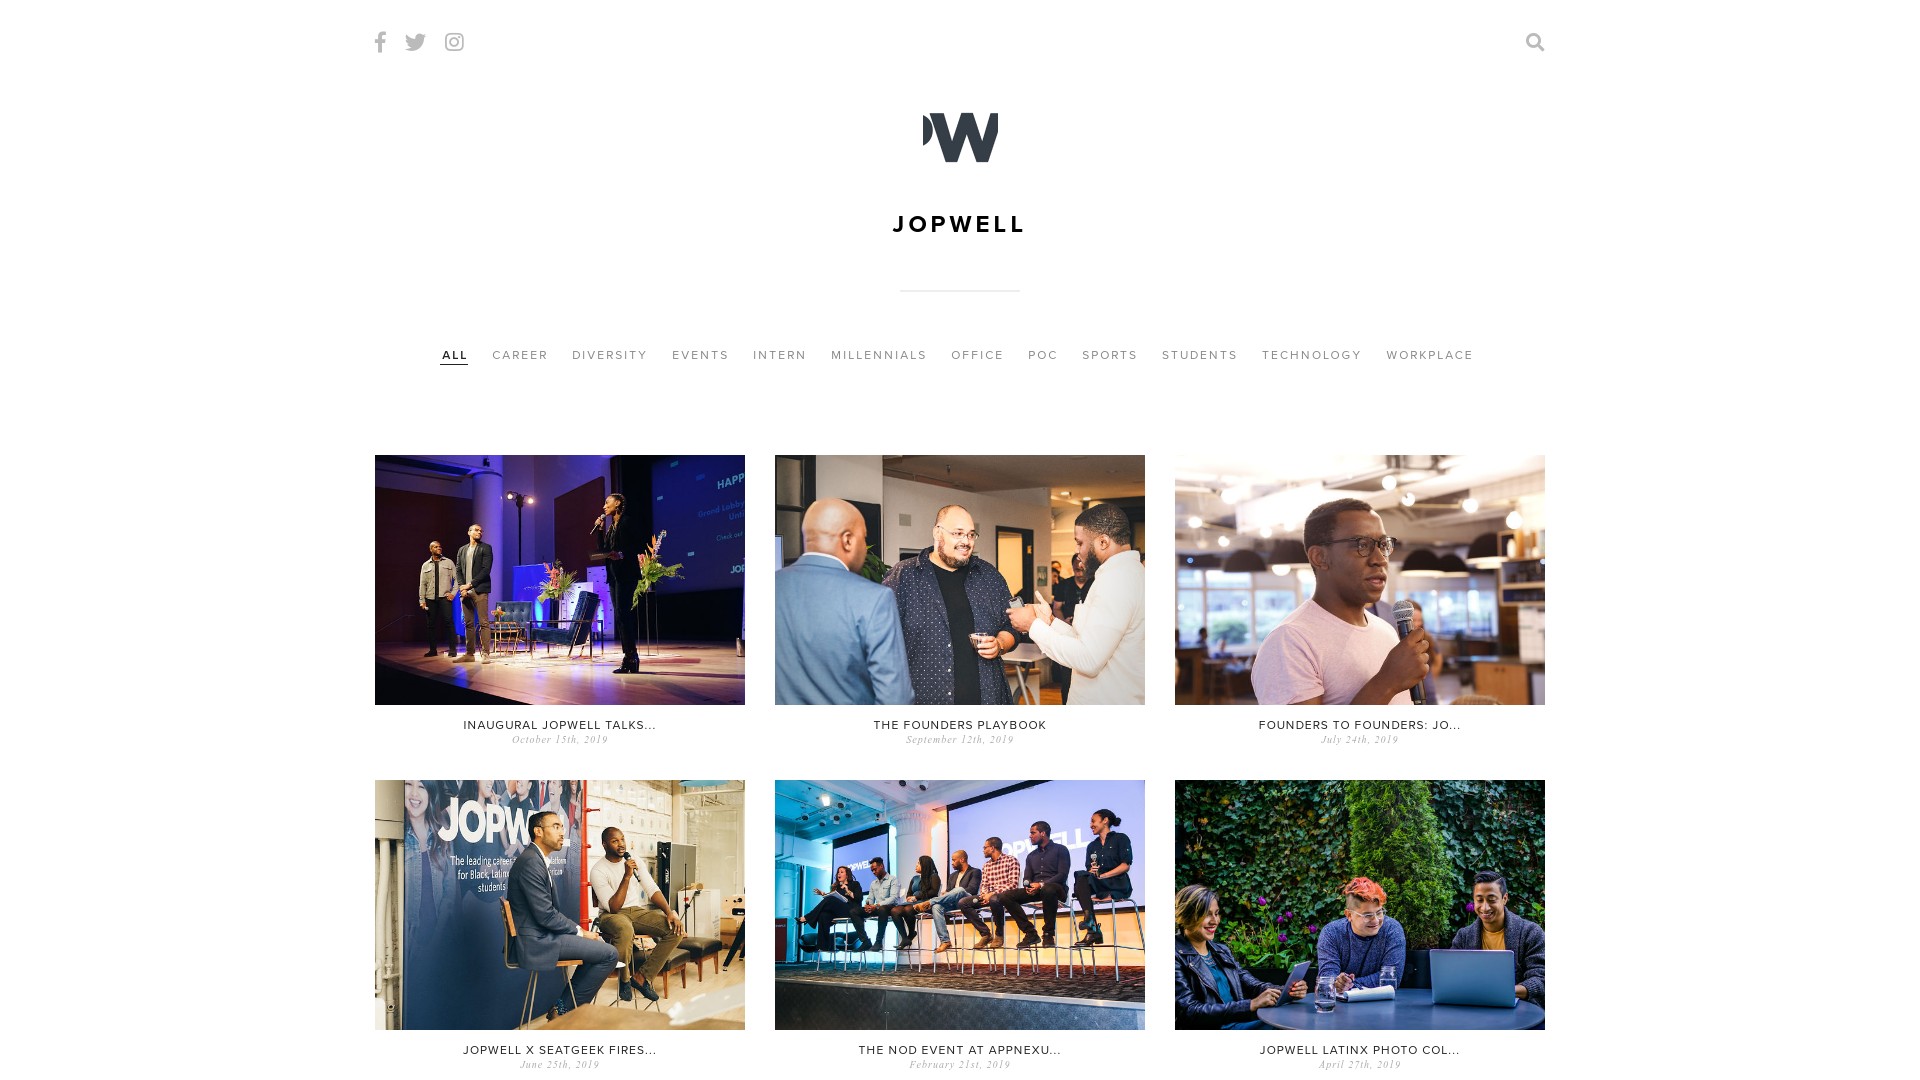 The Jopwell Collection (#TheJopwellCollection) is an album of more than 100 free-to-download stock photos featuring leaders in the Jopwell Collection.